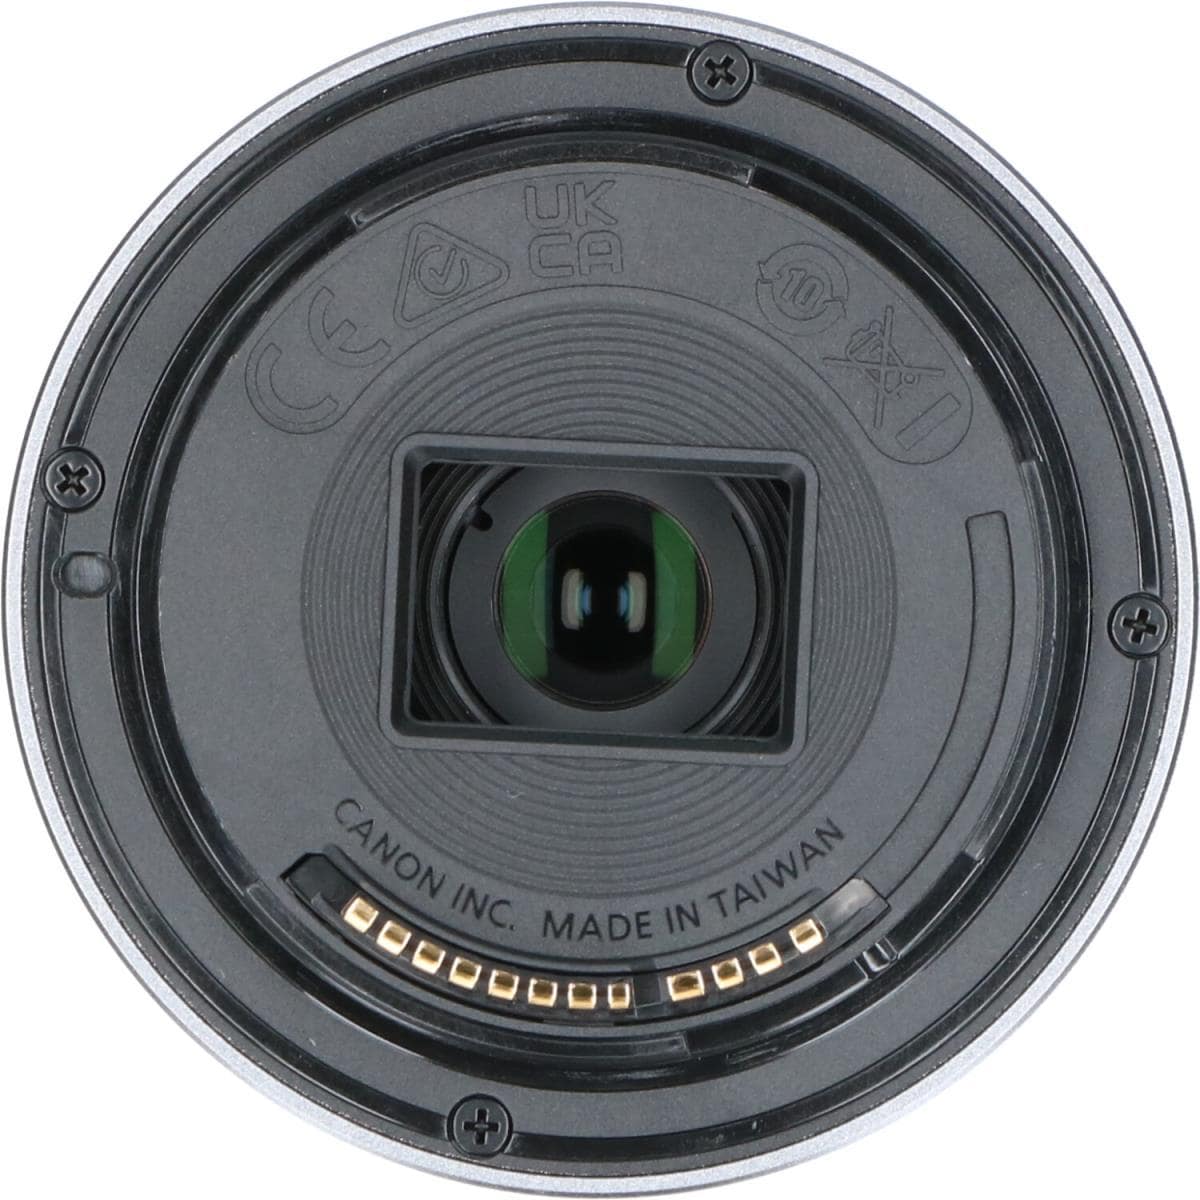 CANON RF-S55-210mm F5-7.1IS STM